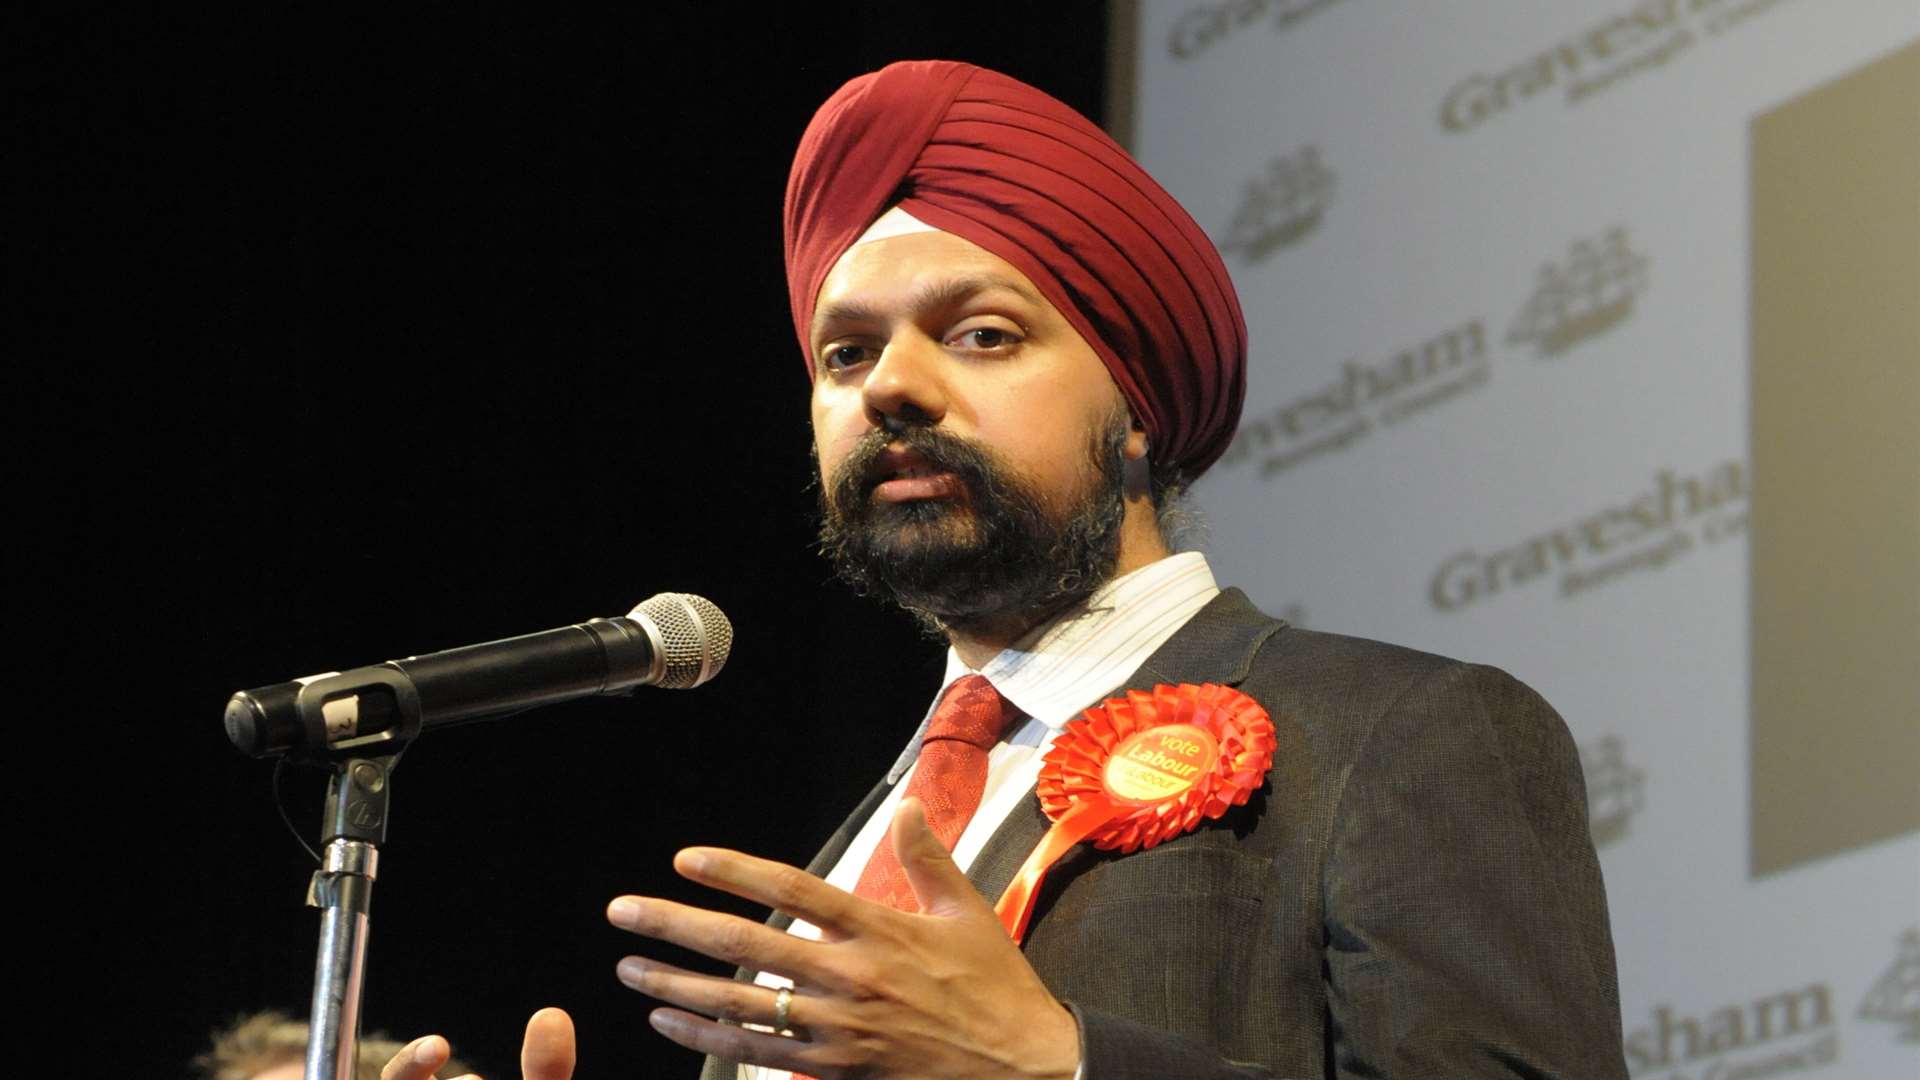 Tanmanjeet Singh Dhesi was disappointed by the result.